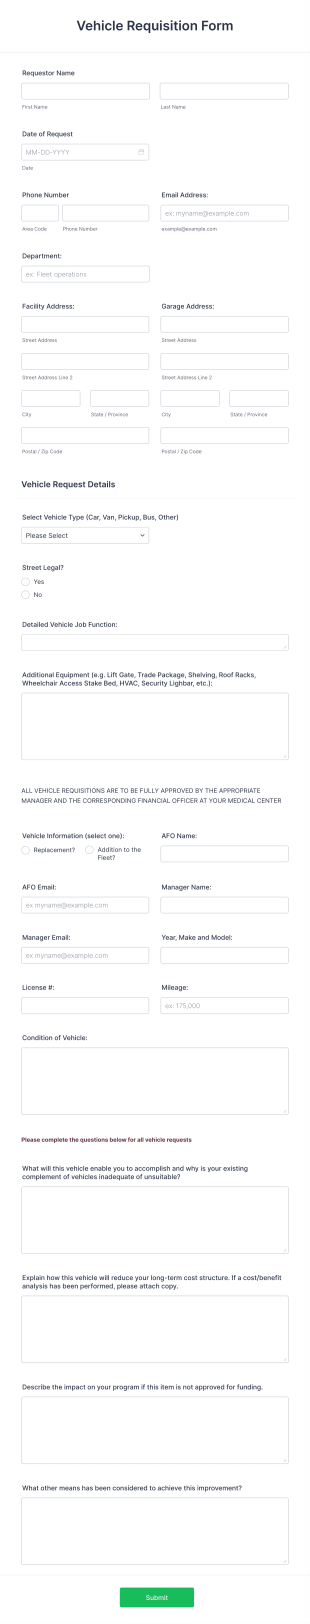 Vehicle Requisition Form Template